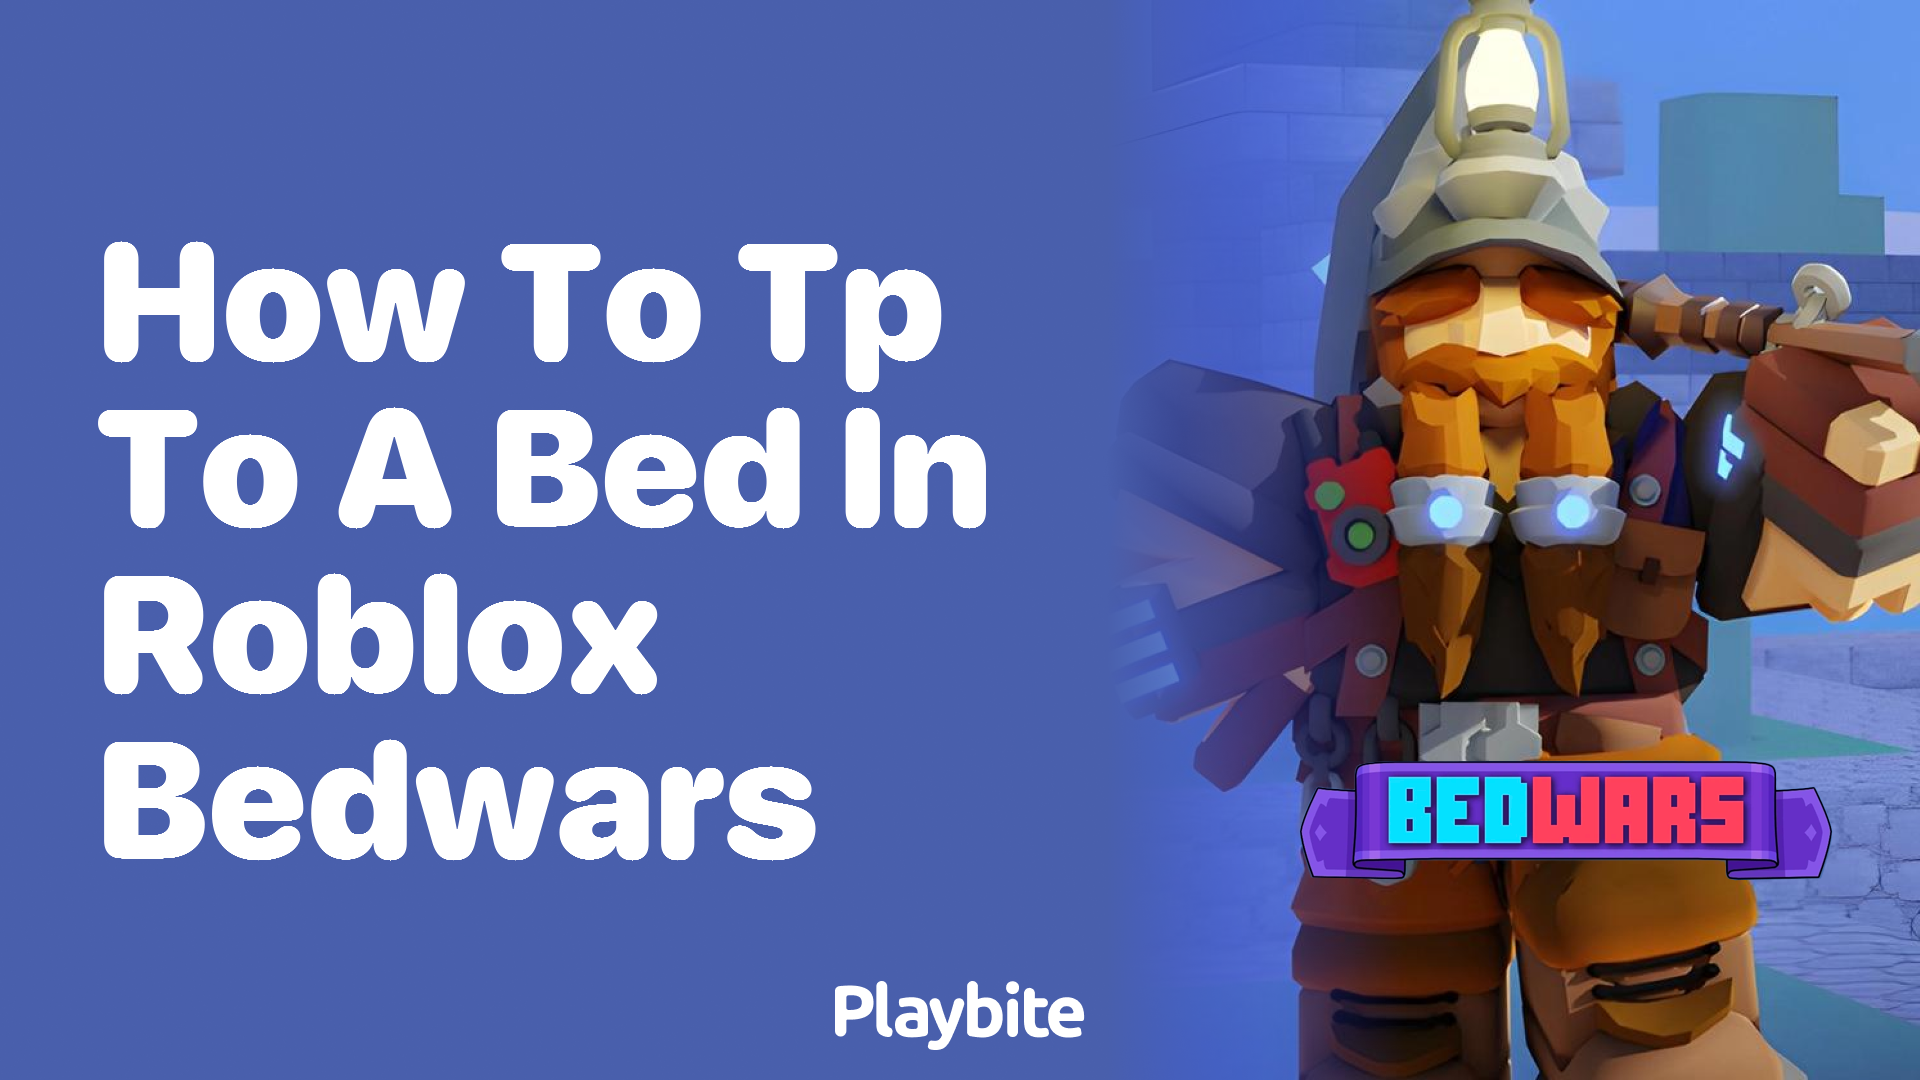 How to TP to a Bed in Roblox Bedwars